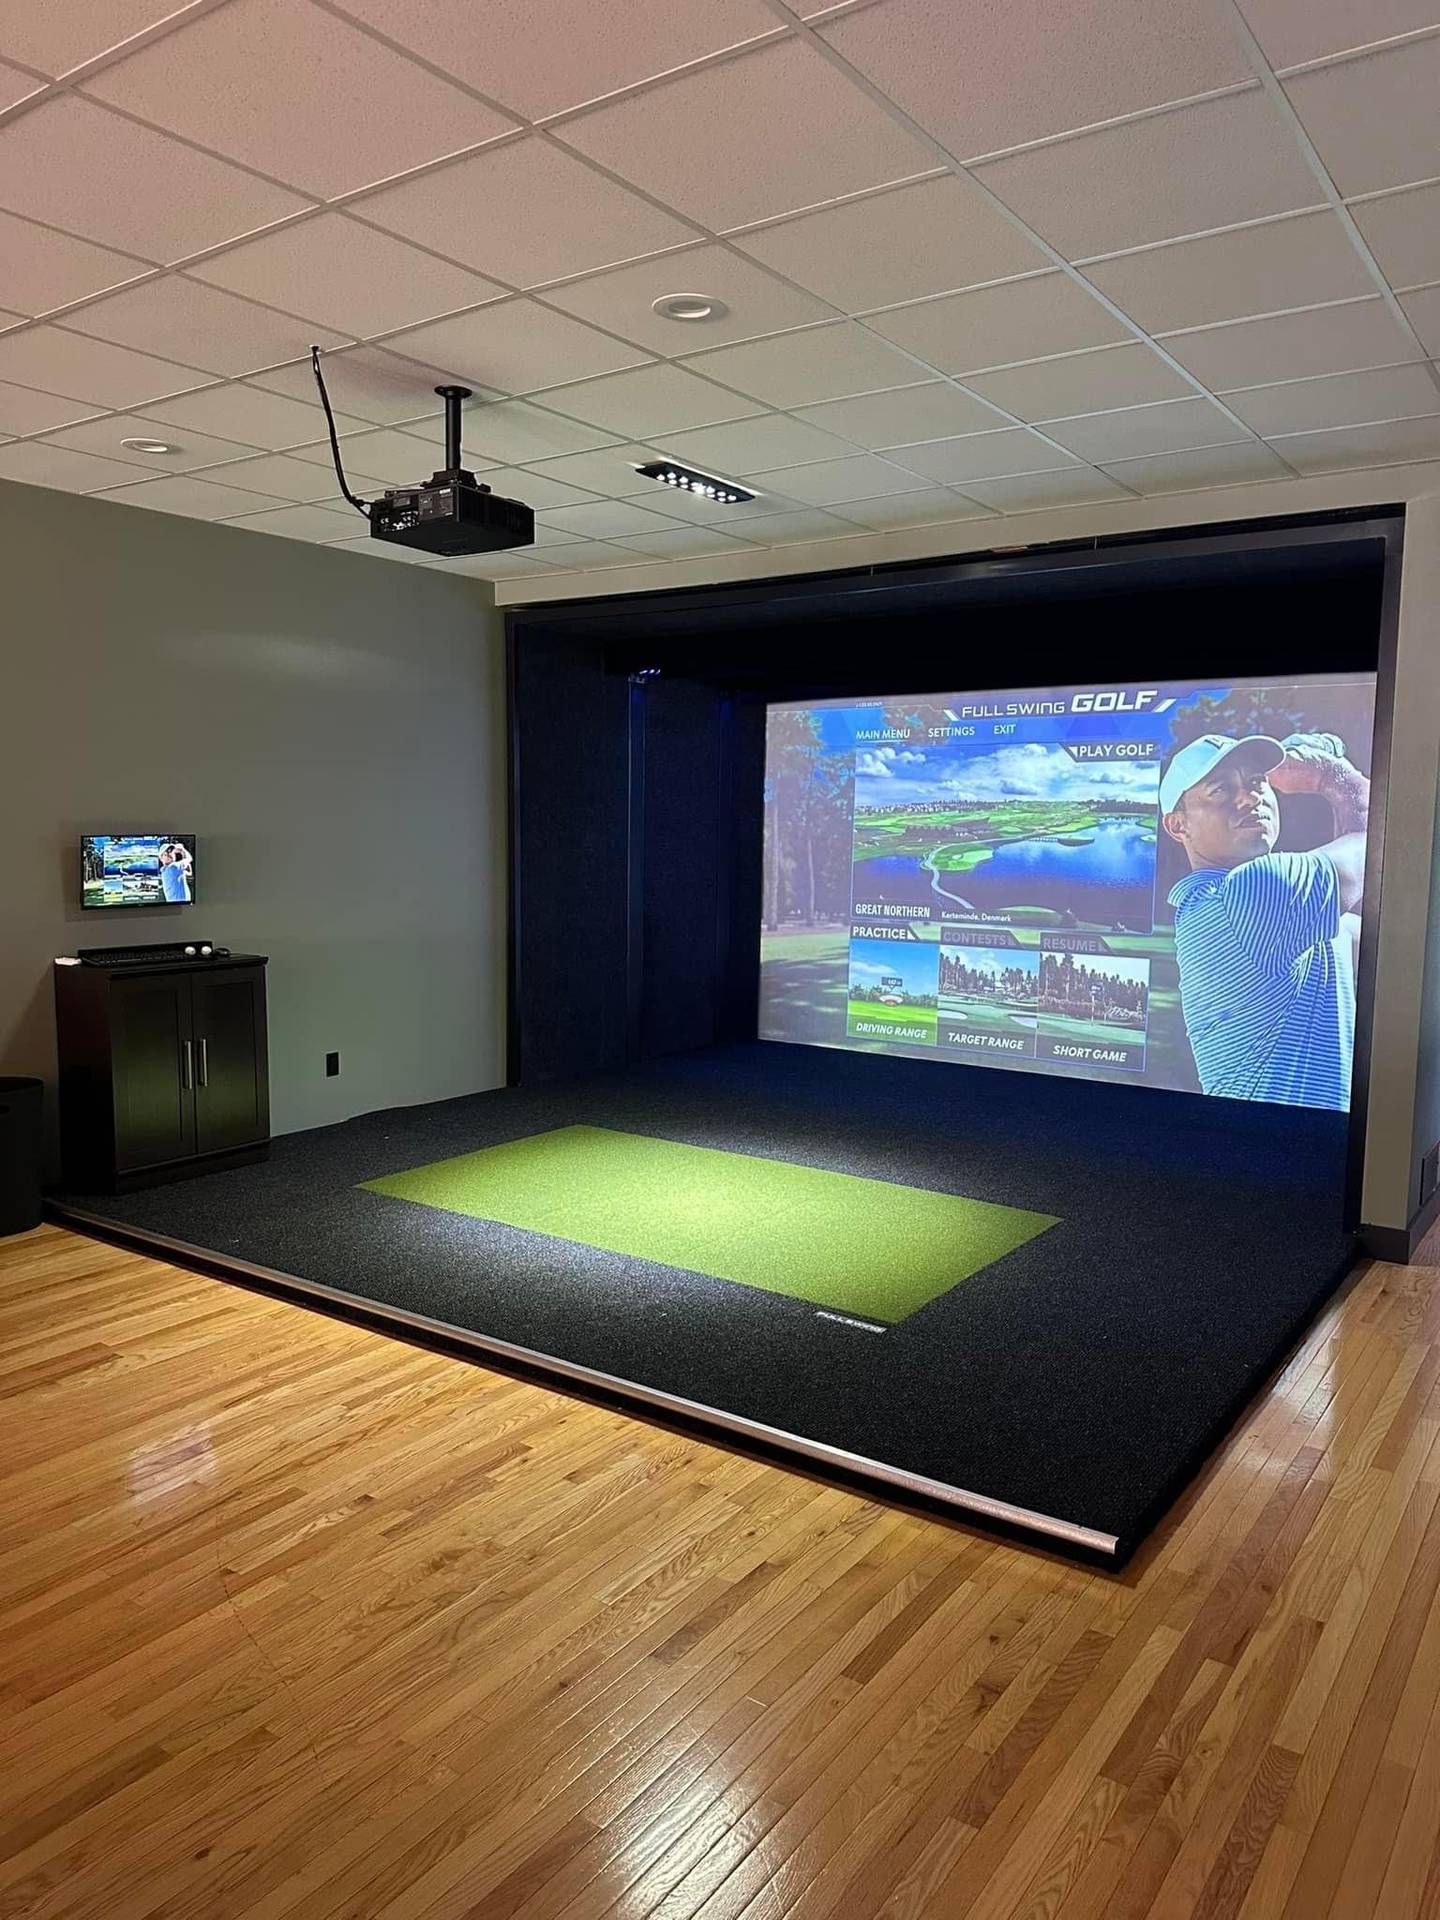 A new sports bar and lounge with golf and multi-sport simulators recently opened in Spring Valley. The Tee Box opened at 223 E. Saint Paul St. on Sept. 8.